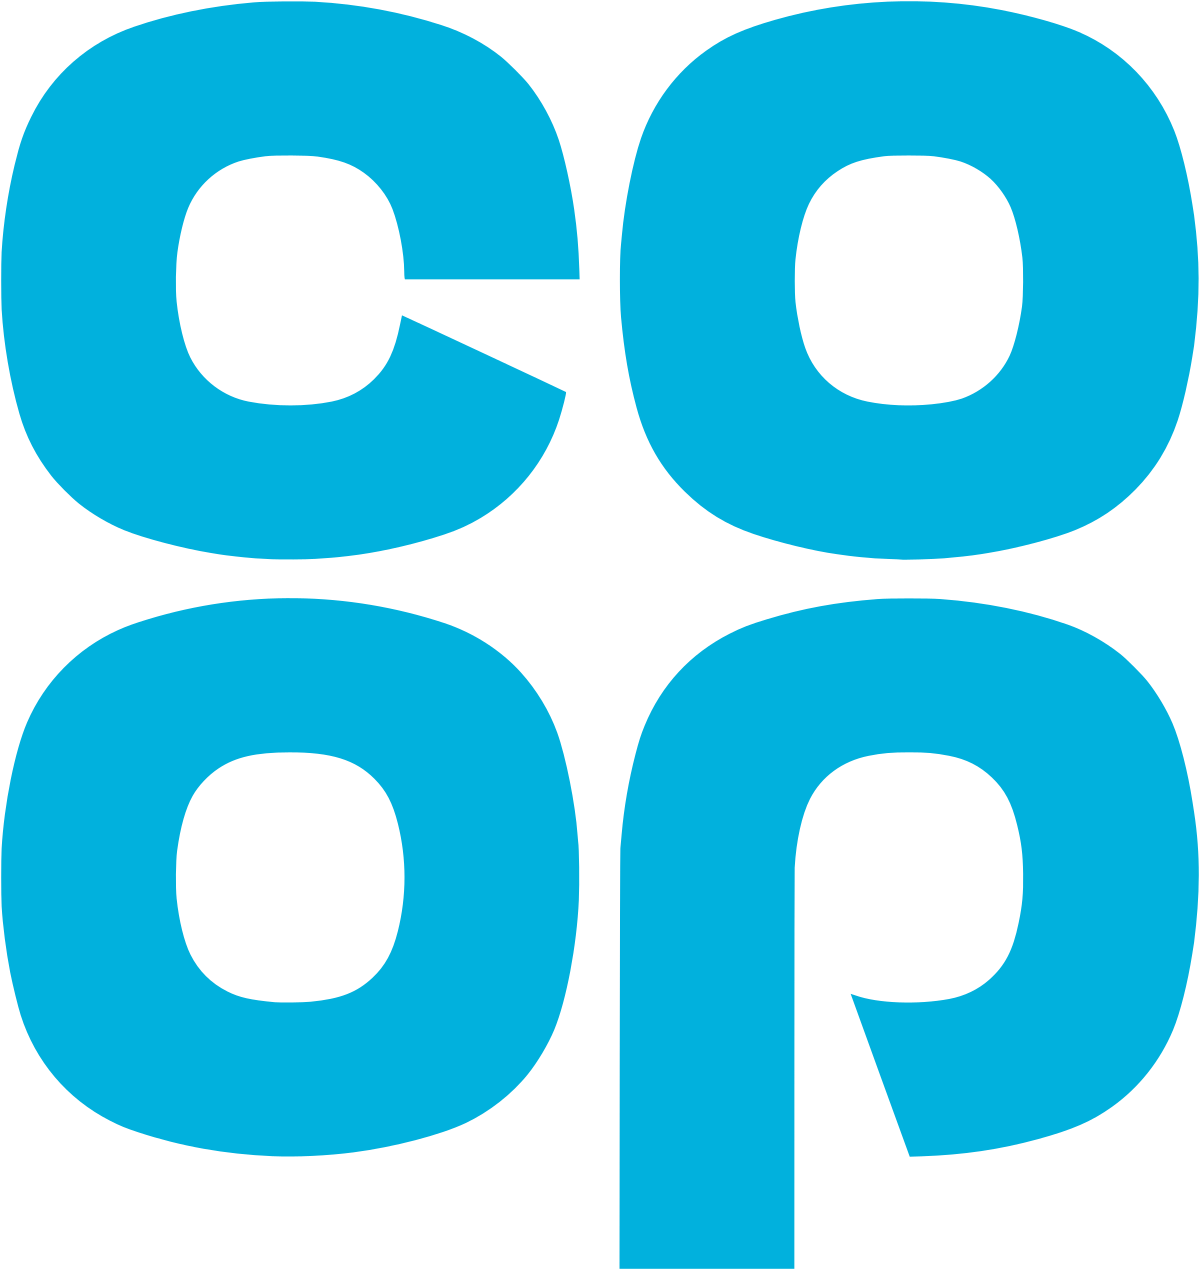 THE CO-OPERATIVE GROUP LIMITED